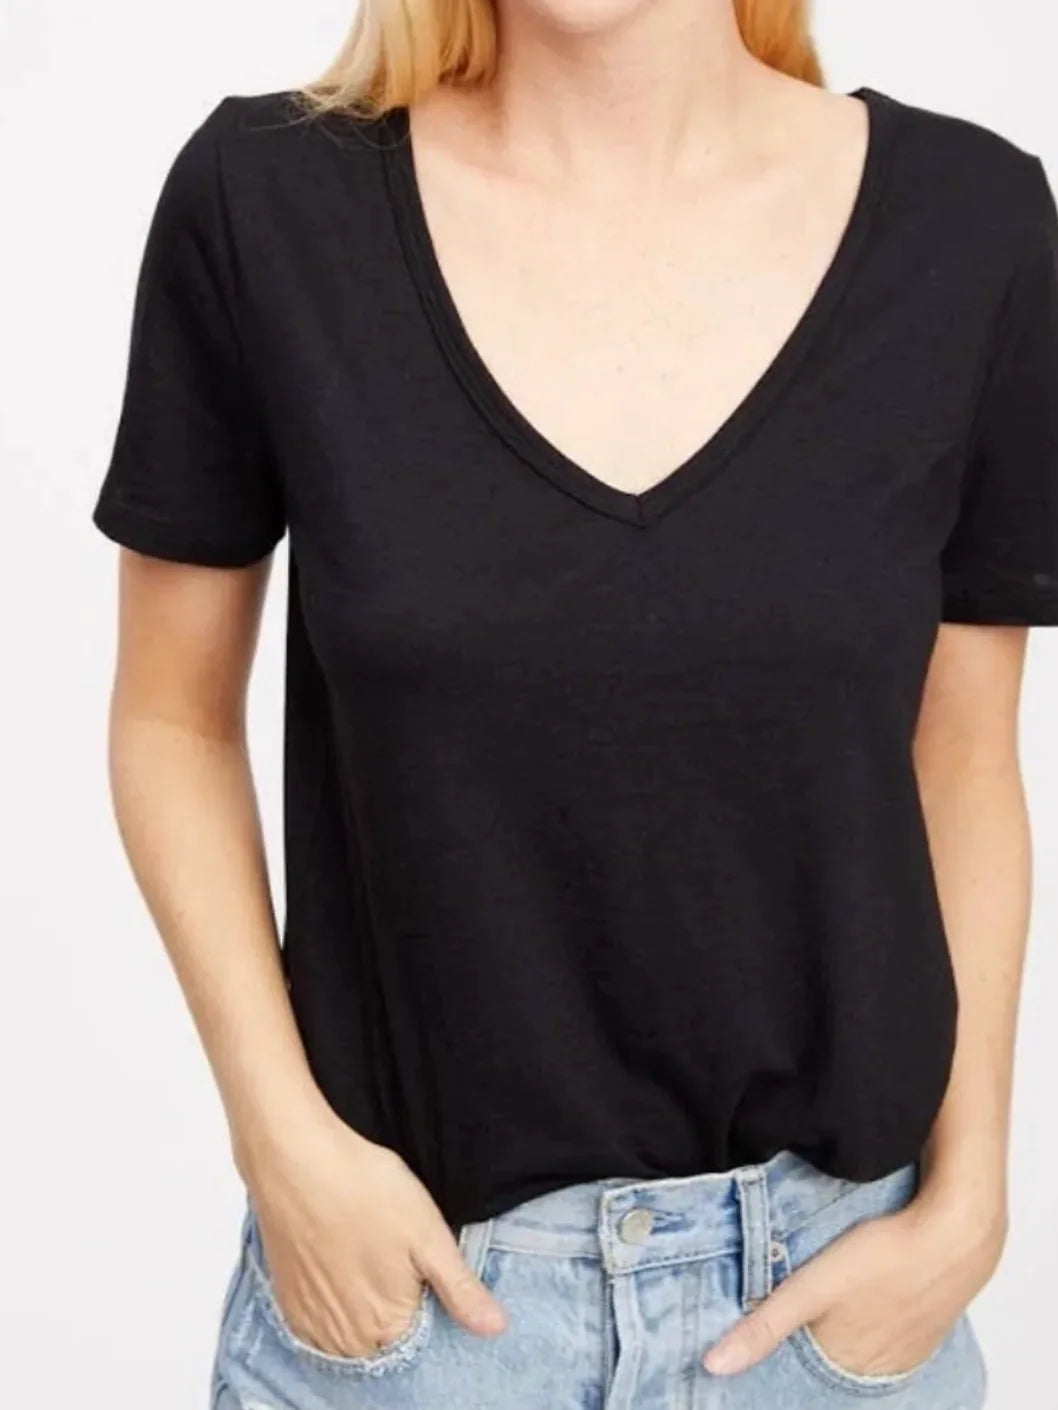 The Ultimate Guide: How to Wear a Basic Black Tee